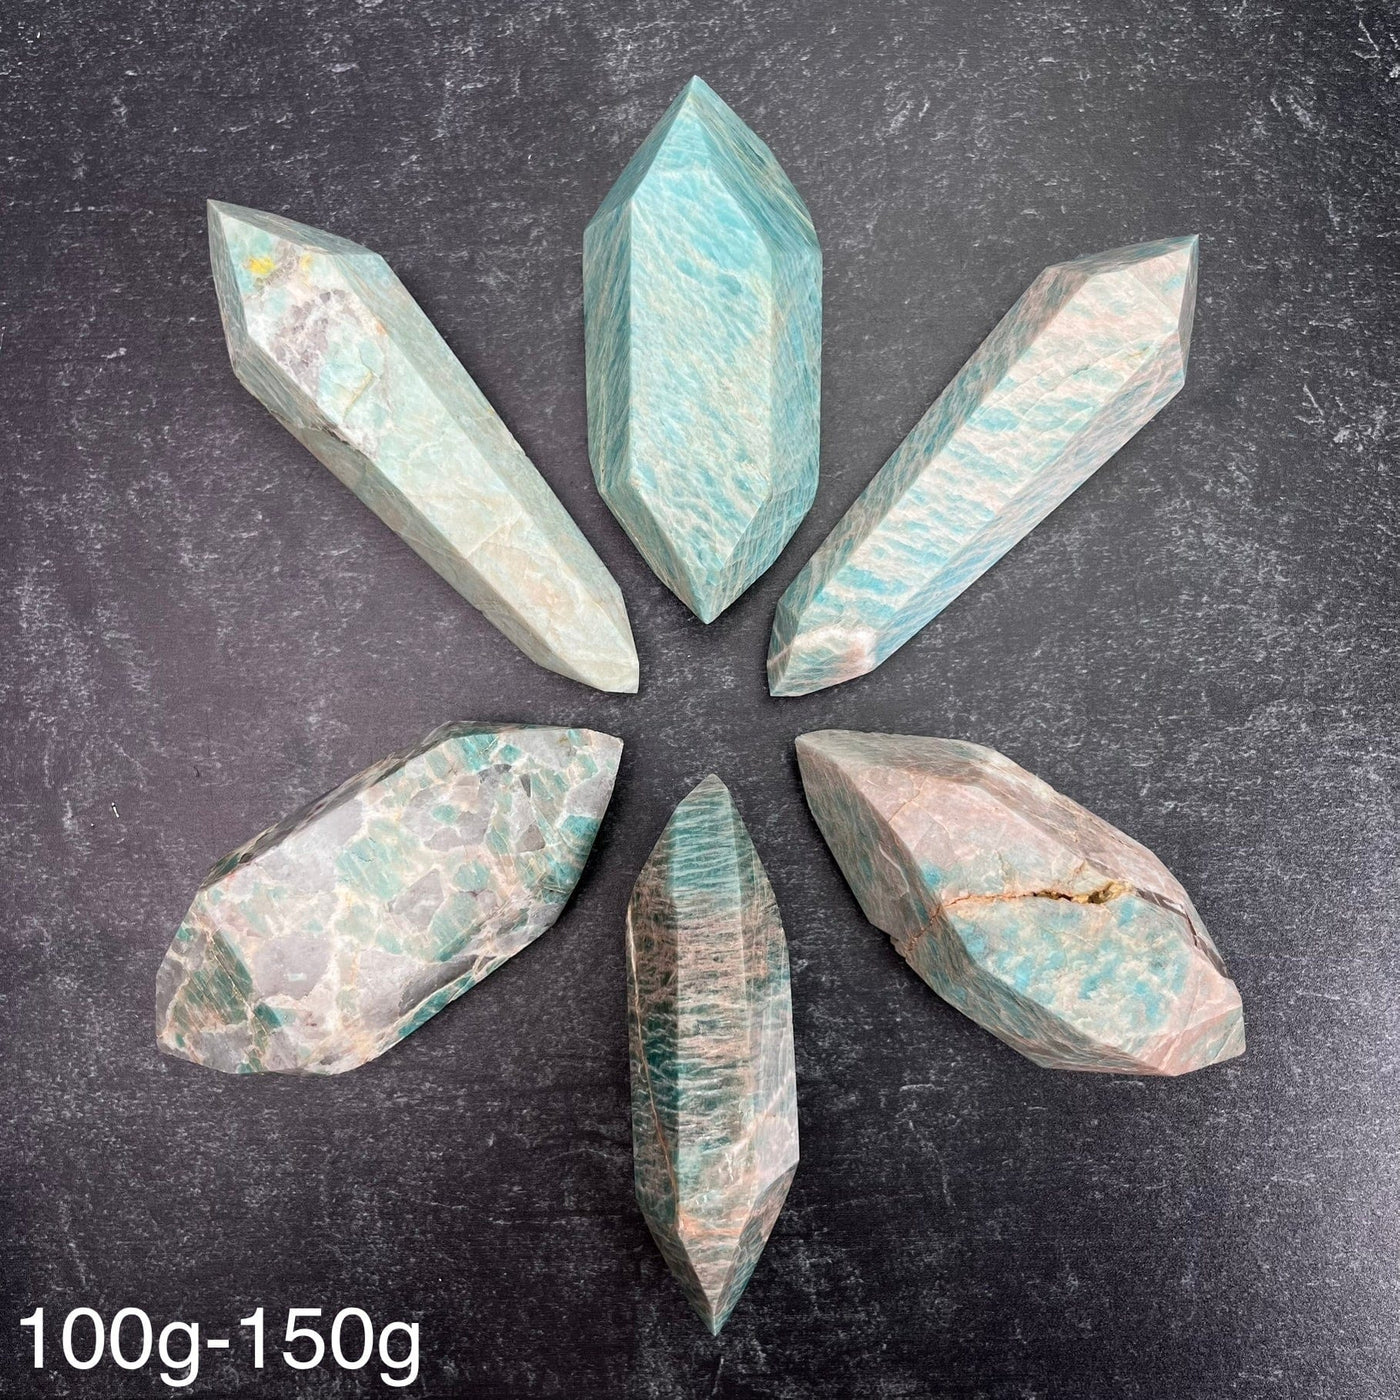 Six different variations of the Amazonite Polished Double Terminated Points, in the weight range of 100g-150g, laid out on a black surface.